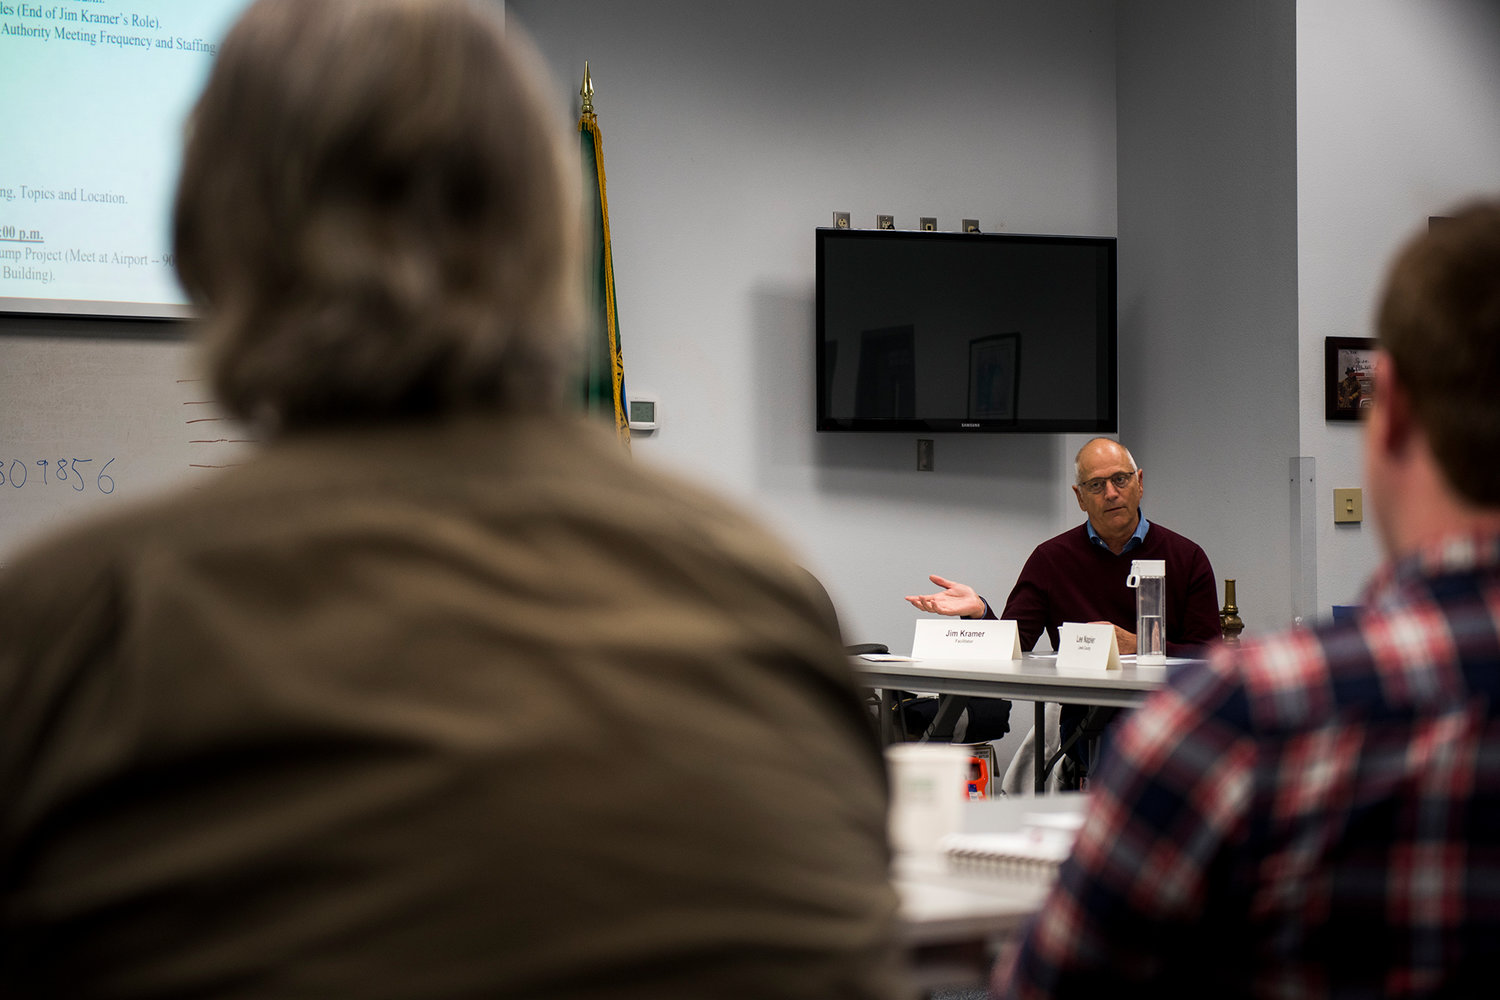 Jim Kramer, facilitator of the Chehalis Basin Flood Authority, formerly announced his resignation during Thursday's meeting at the Riverside Fire Authority in Centralia.